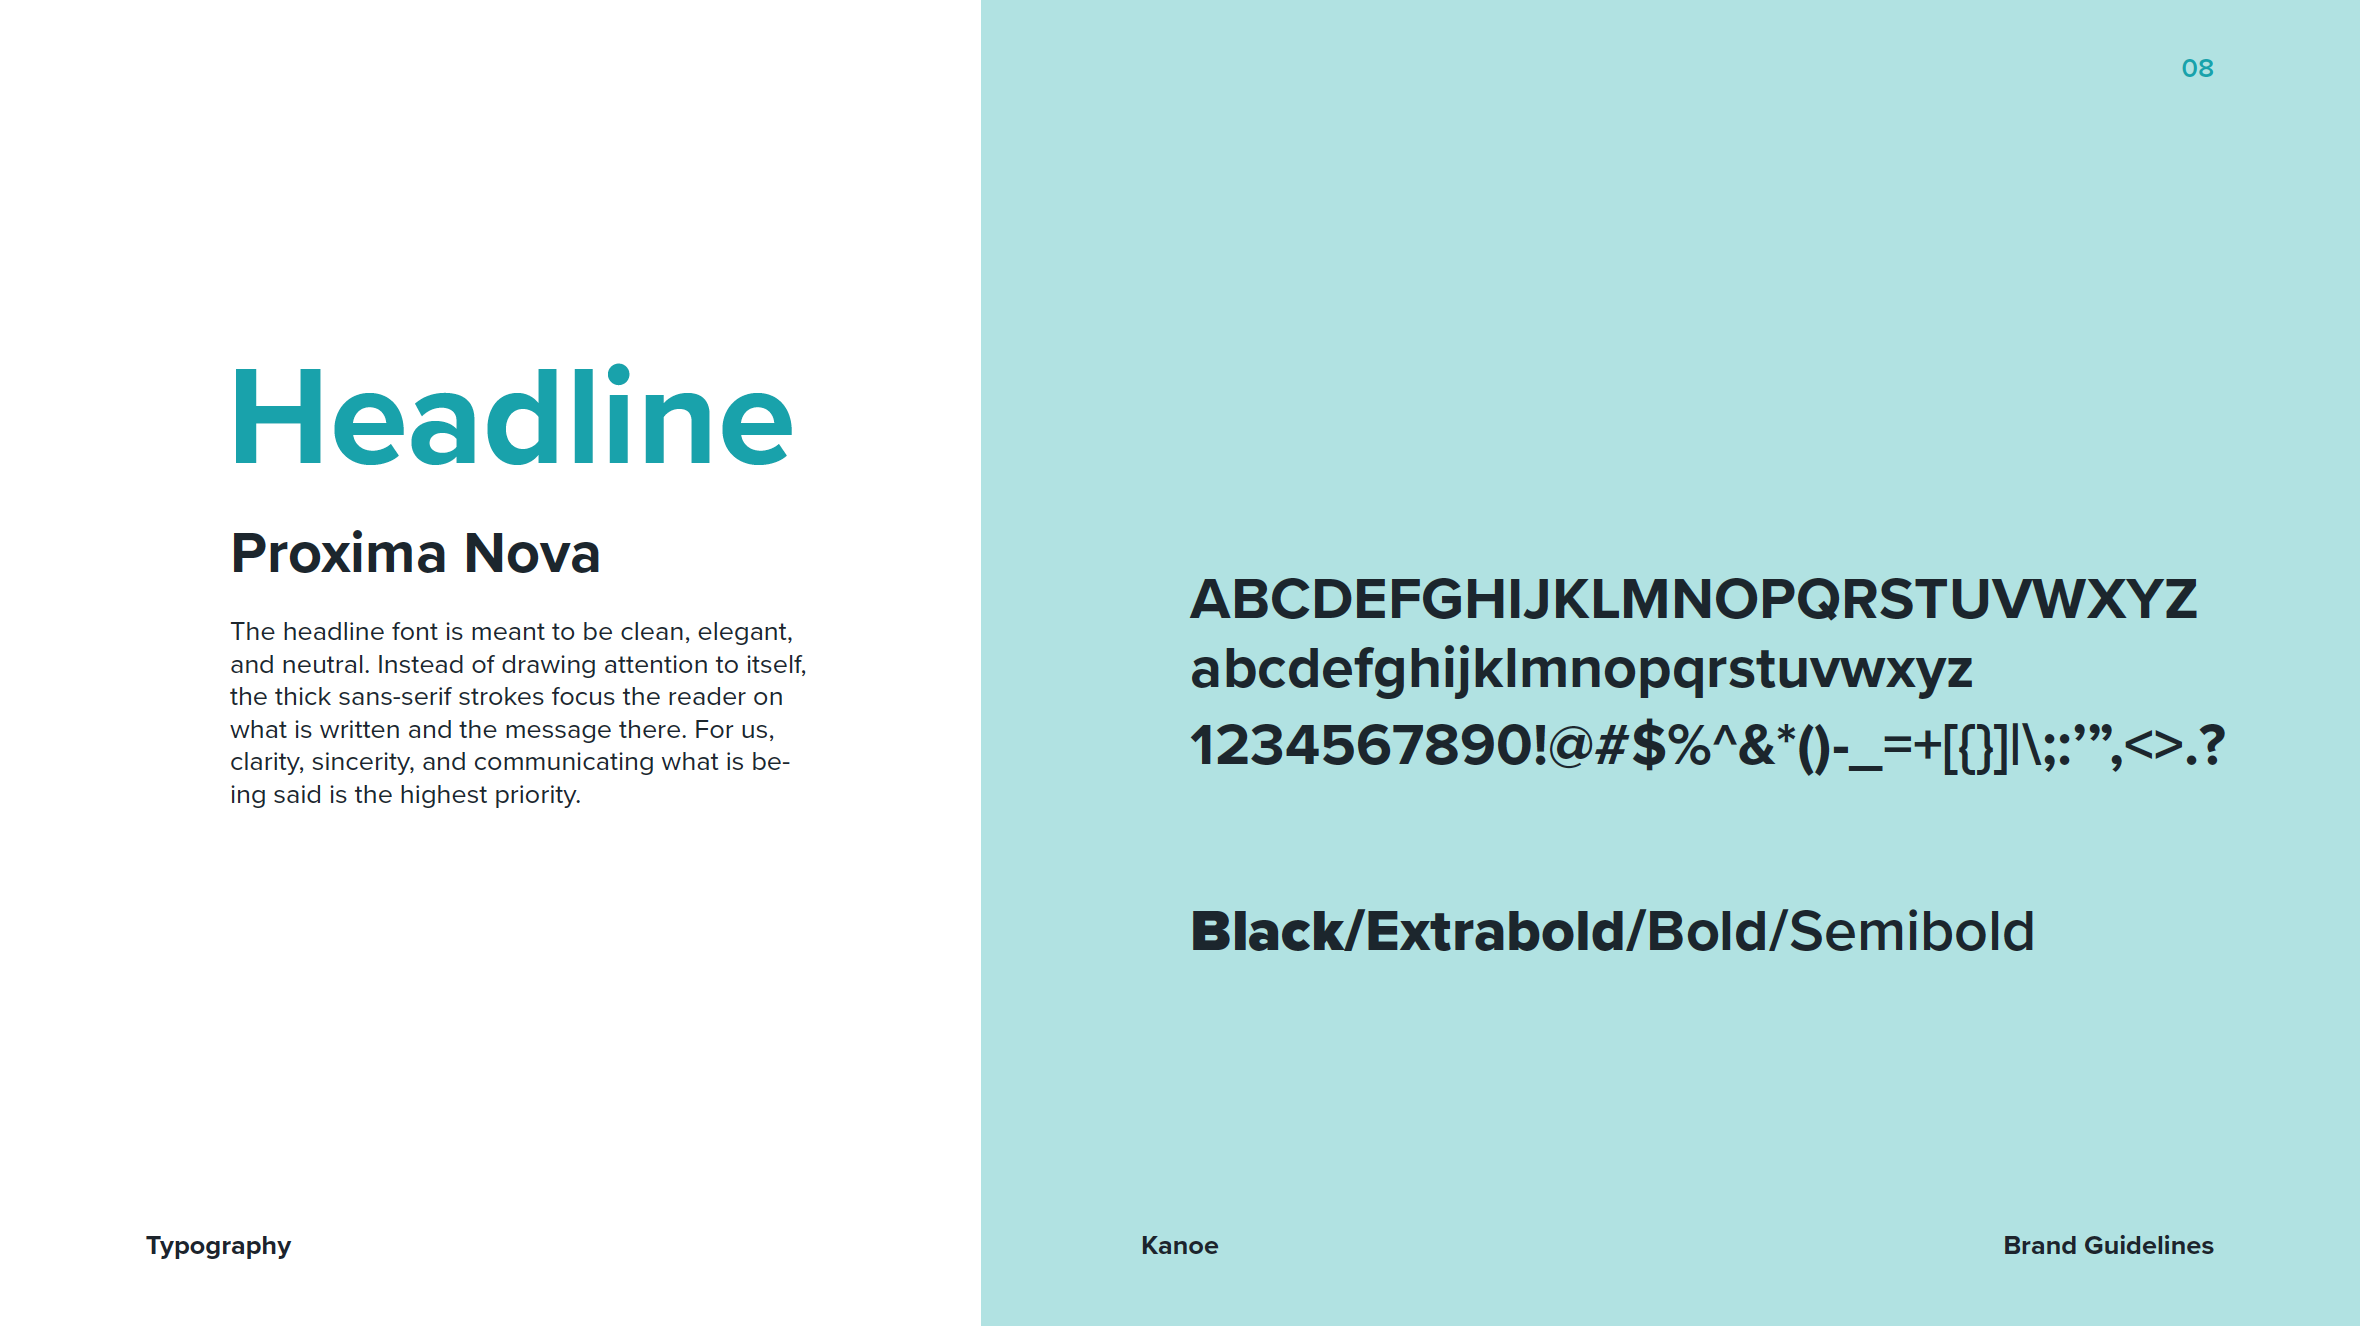 brand guidelines 8